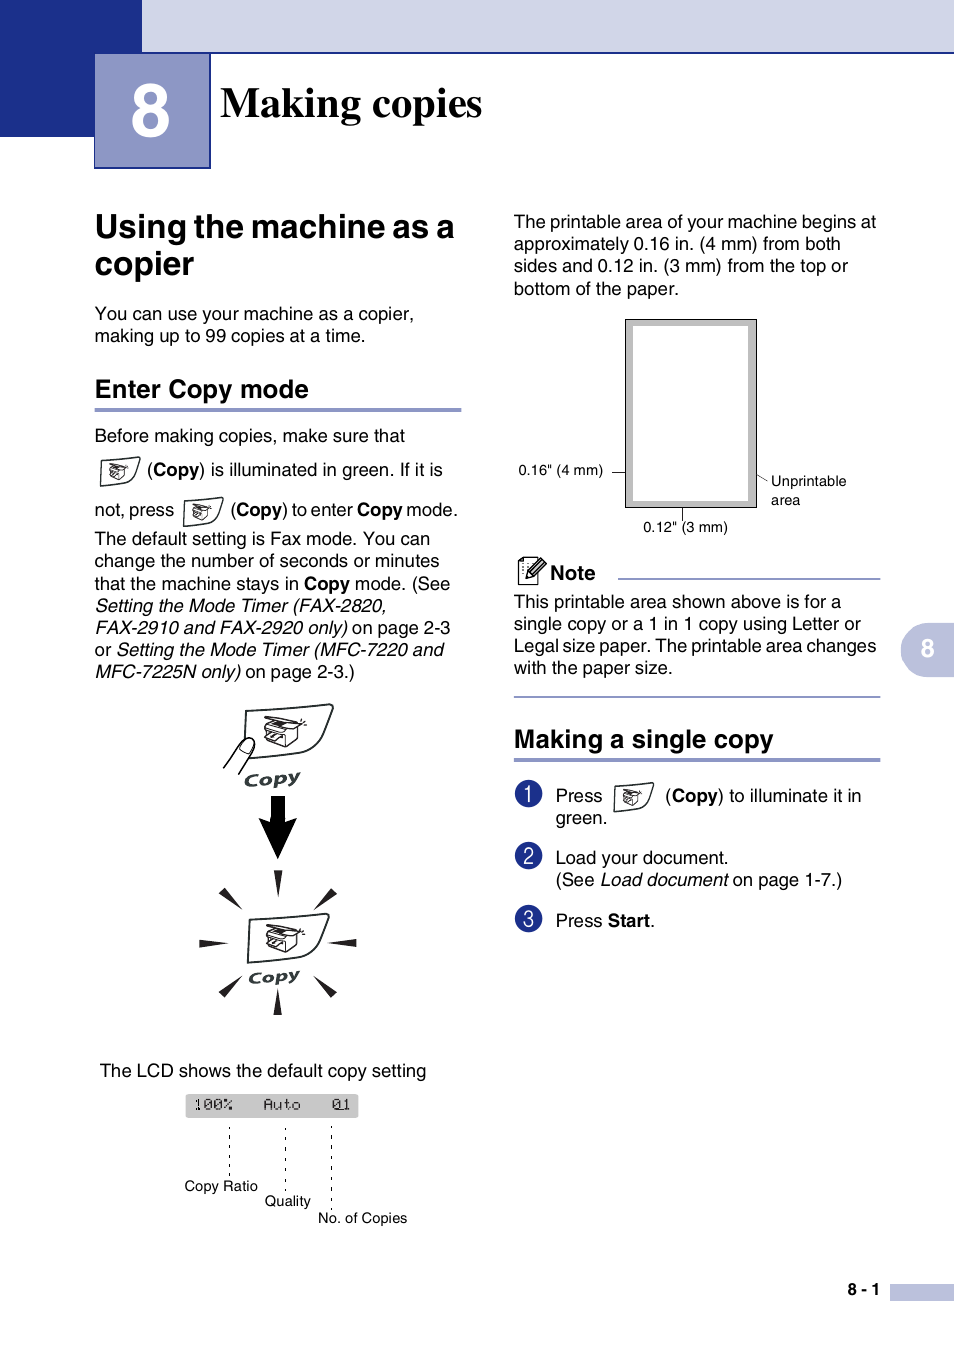 8 making copies, Using the machine as a copier, Enter copy mode | Making a single copy, Making copies, Using the machine as a copier -1, Enter copy mode -1 making a single copy -1 | Brother IntelliFax-2820 User Manual | Page 76 / 159